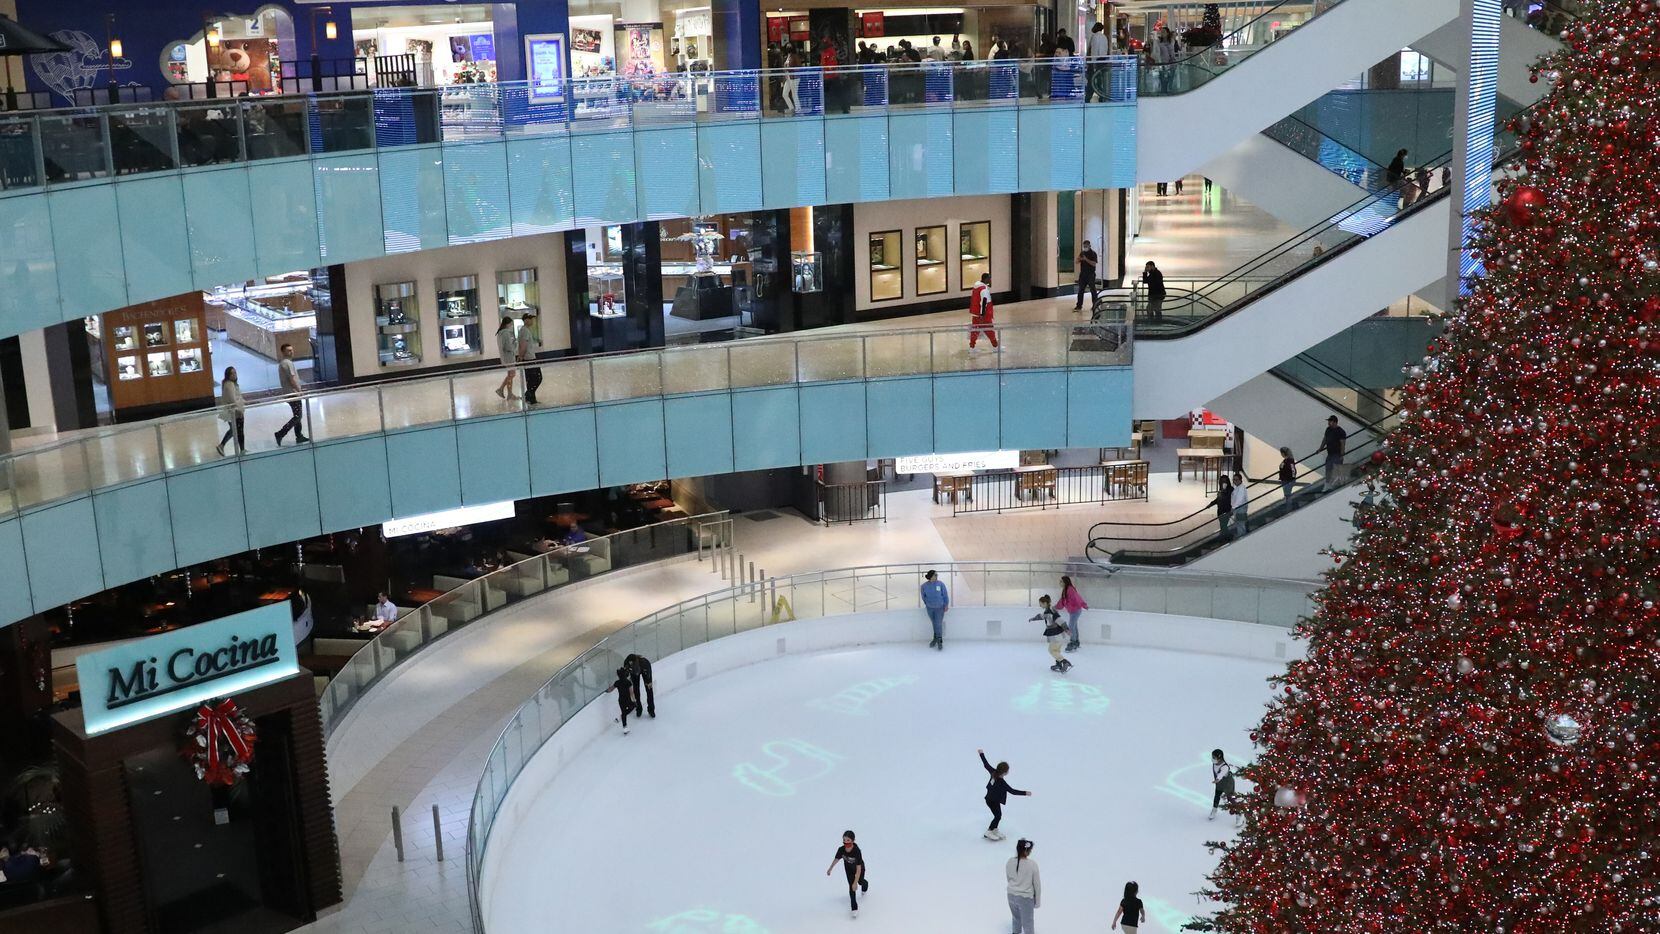 The Dallas Galleria's 95-foot tall tree sits in the center of the mall's ice skating rink as shoppers walk by and skaters spin around the rink on November 18, 2021. (Liesbeth Powers/Special Contributor)